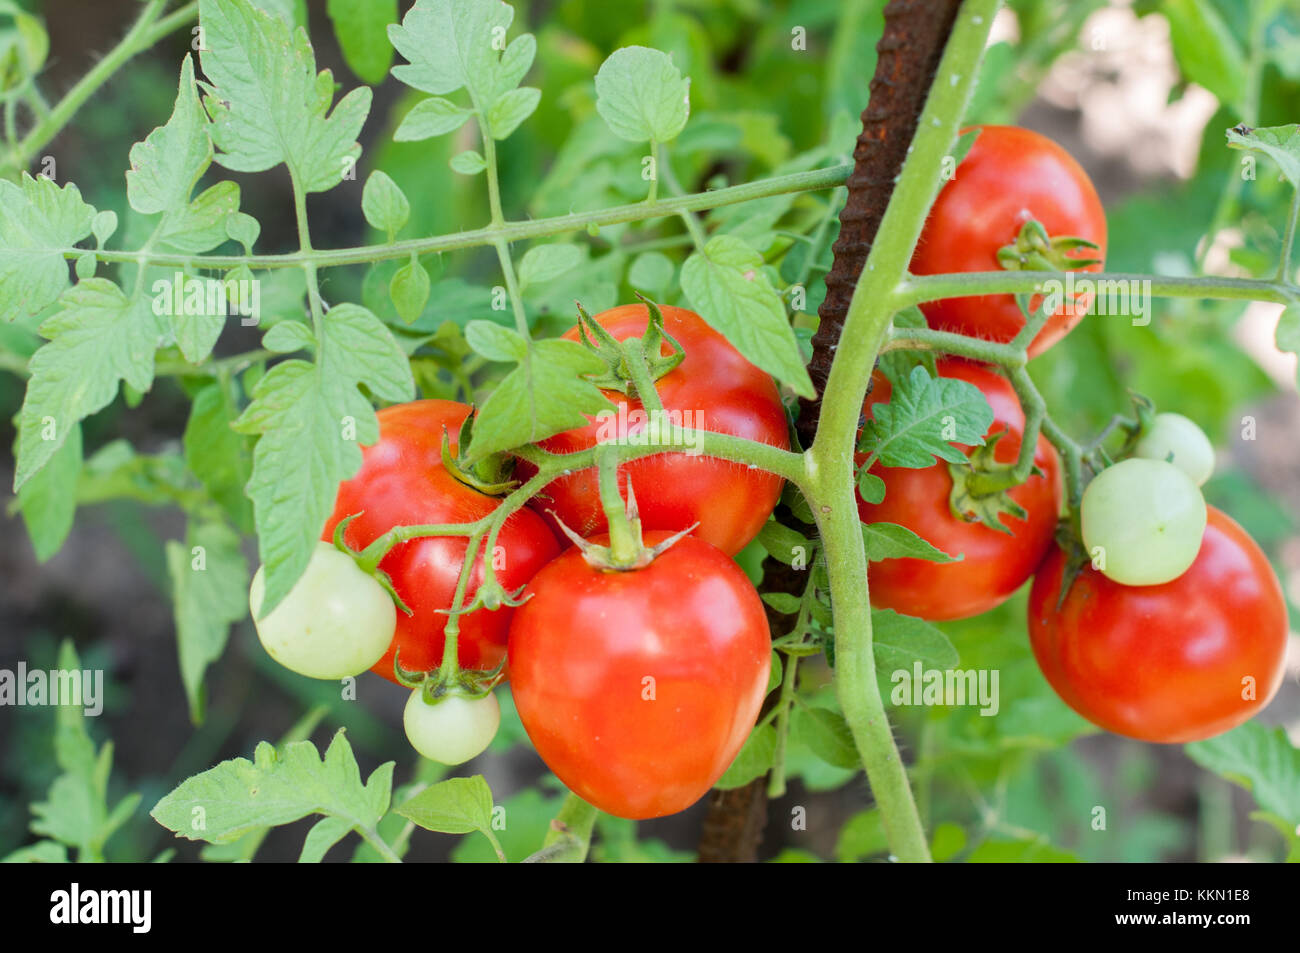 Part of tomato plant with green and red fruits Stock Photo